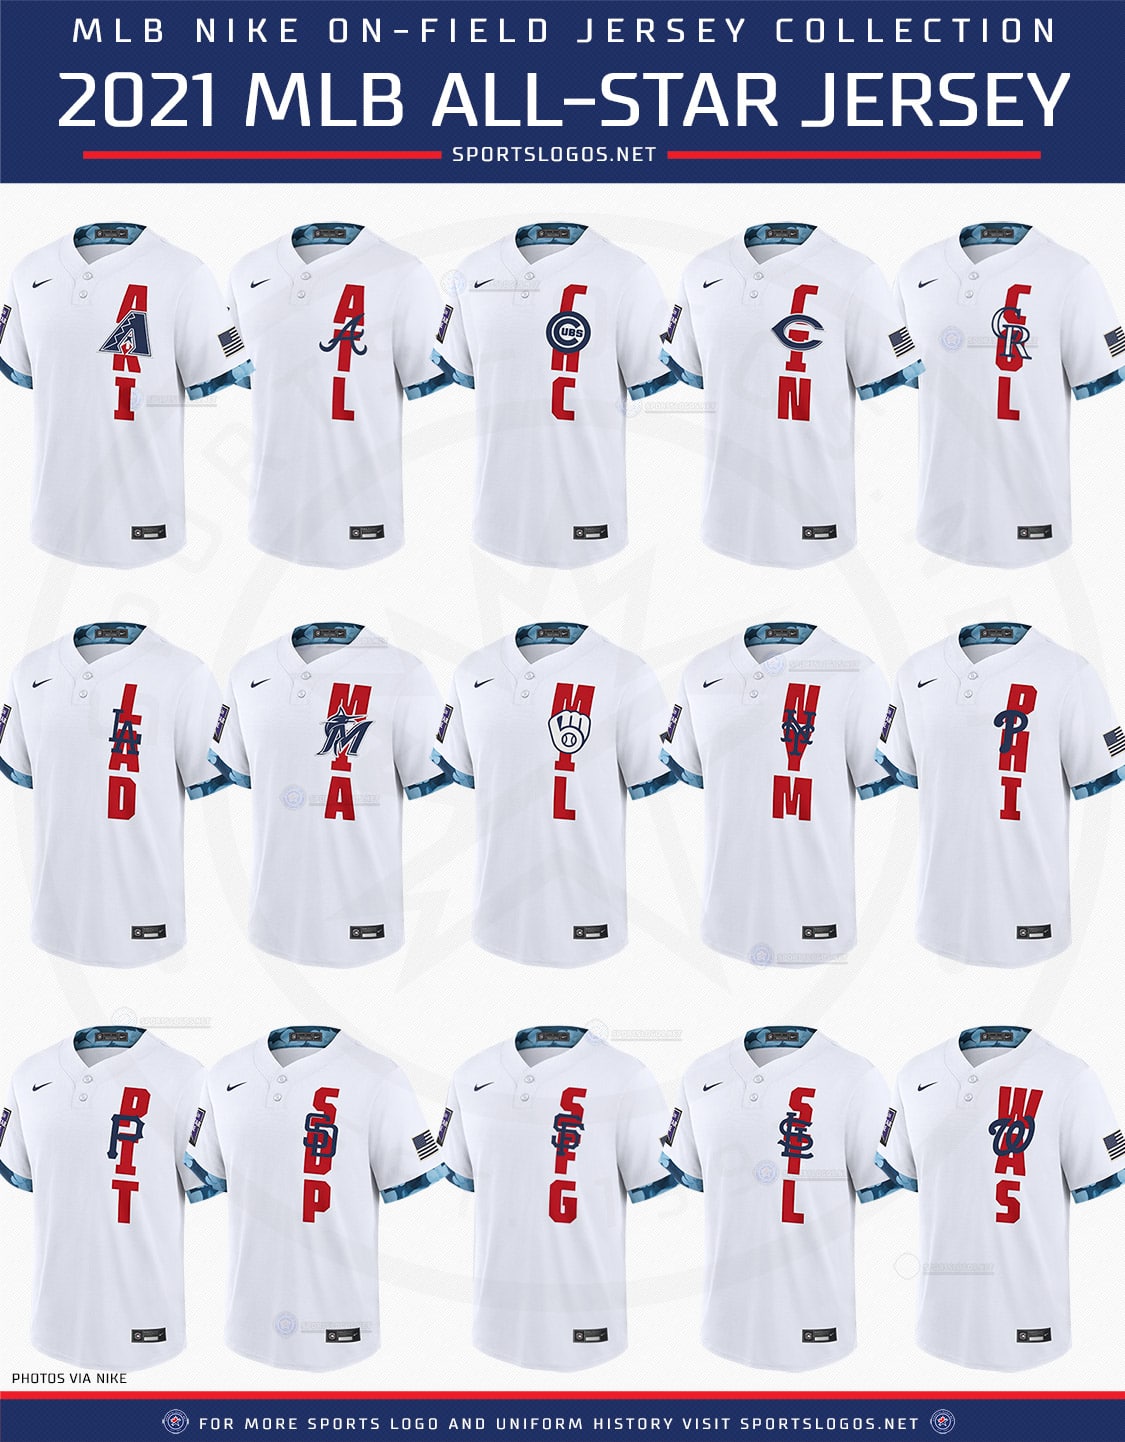 MLB releases 2021 All-Star Game jerseys and there is a big change